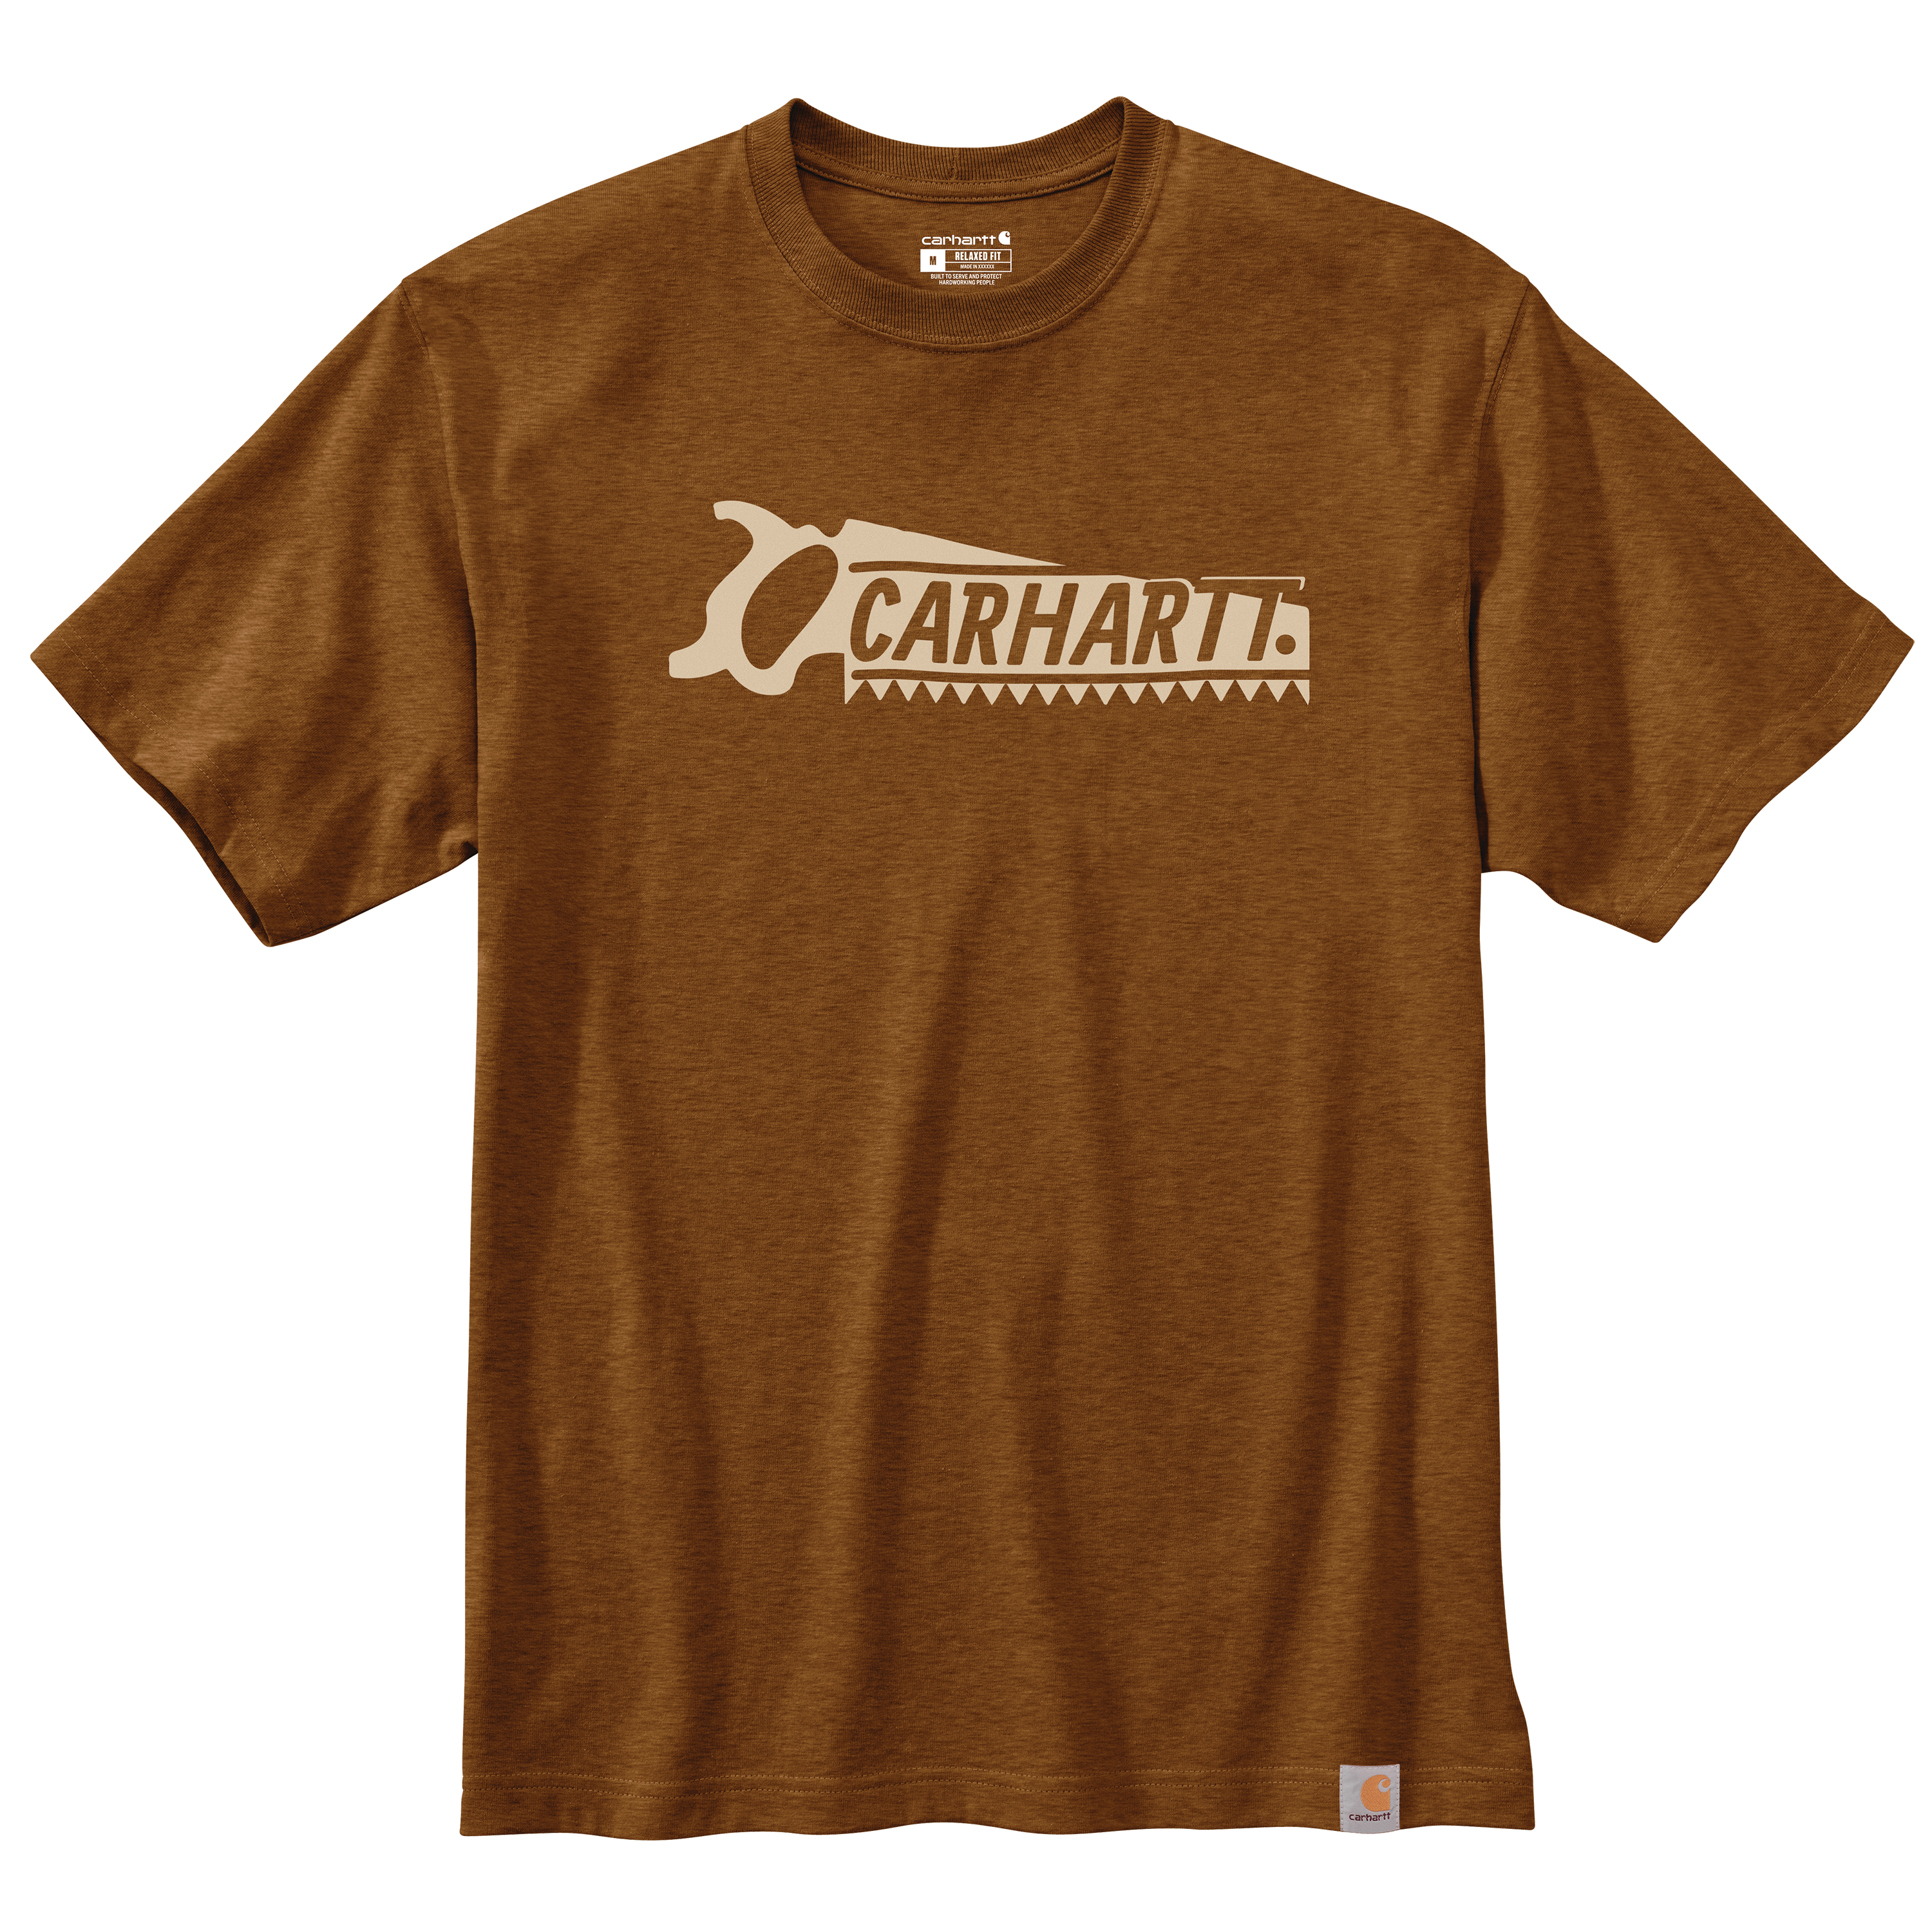 Carhartt Relaxed Fit Heavyweight Short-Sleeve Saw Graphic T-Shirt